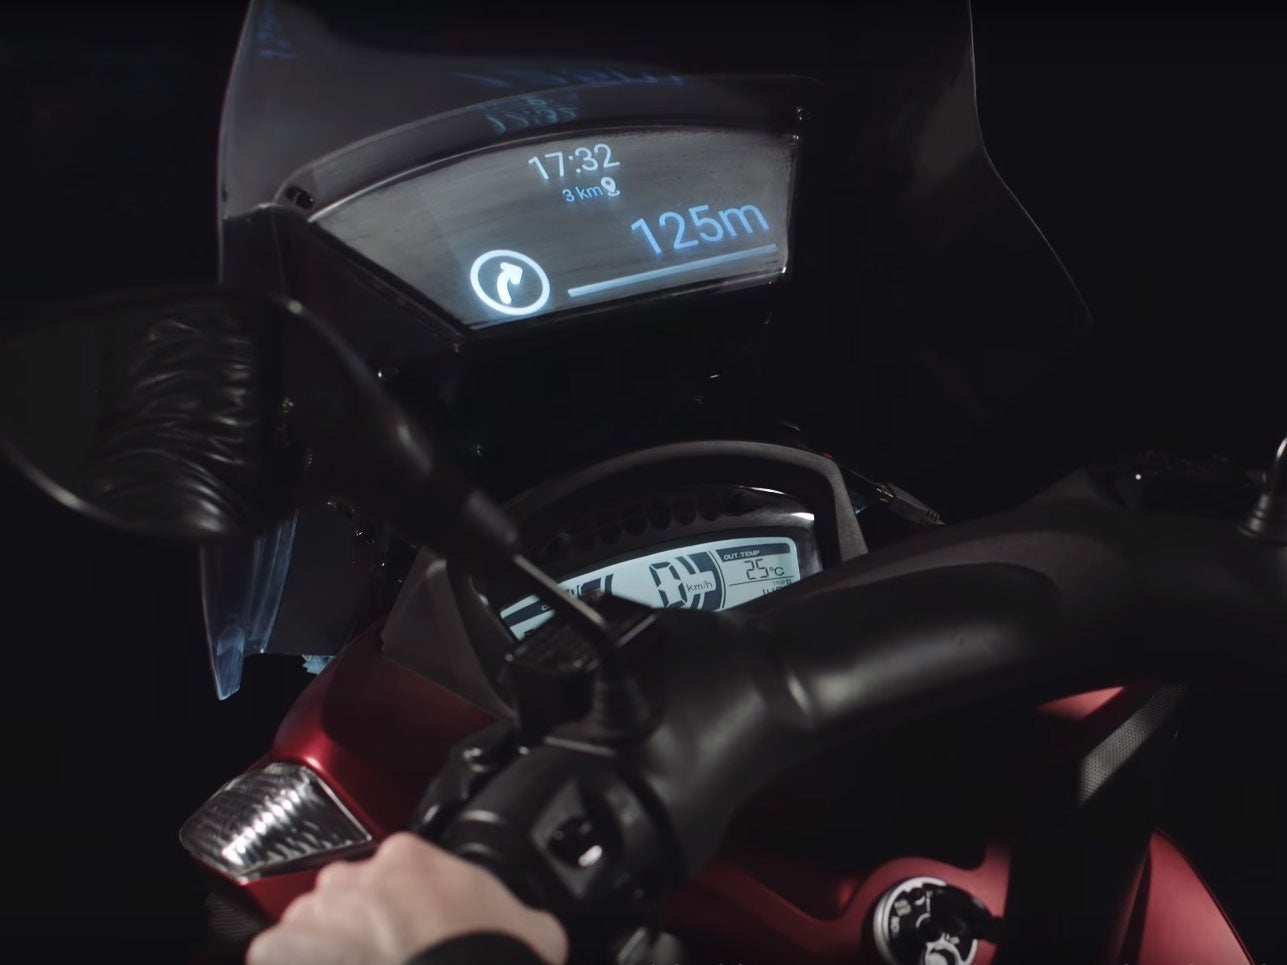 The scooter's head-up display gives directions and message alerts